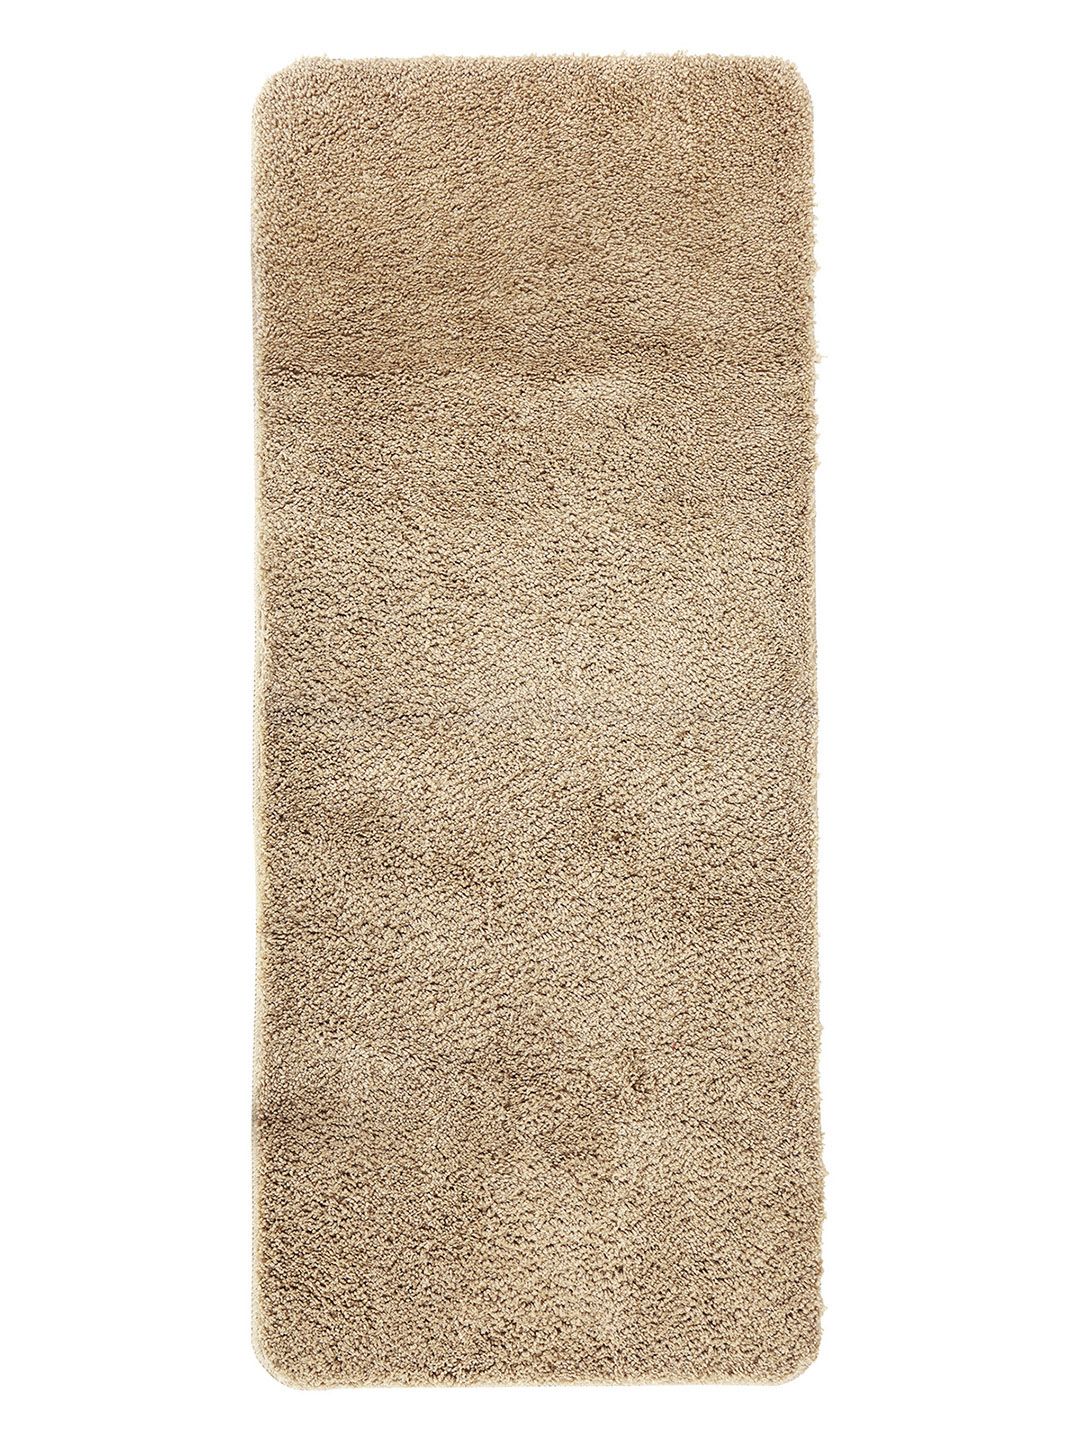 OBSESSIONS Beige Textured Diana Anti-Skid Bath Rug Price in India